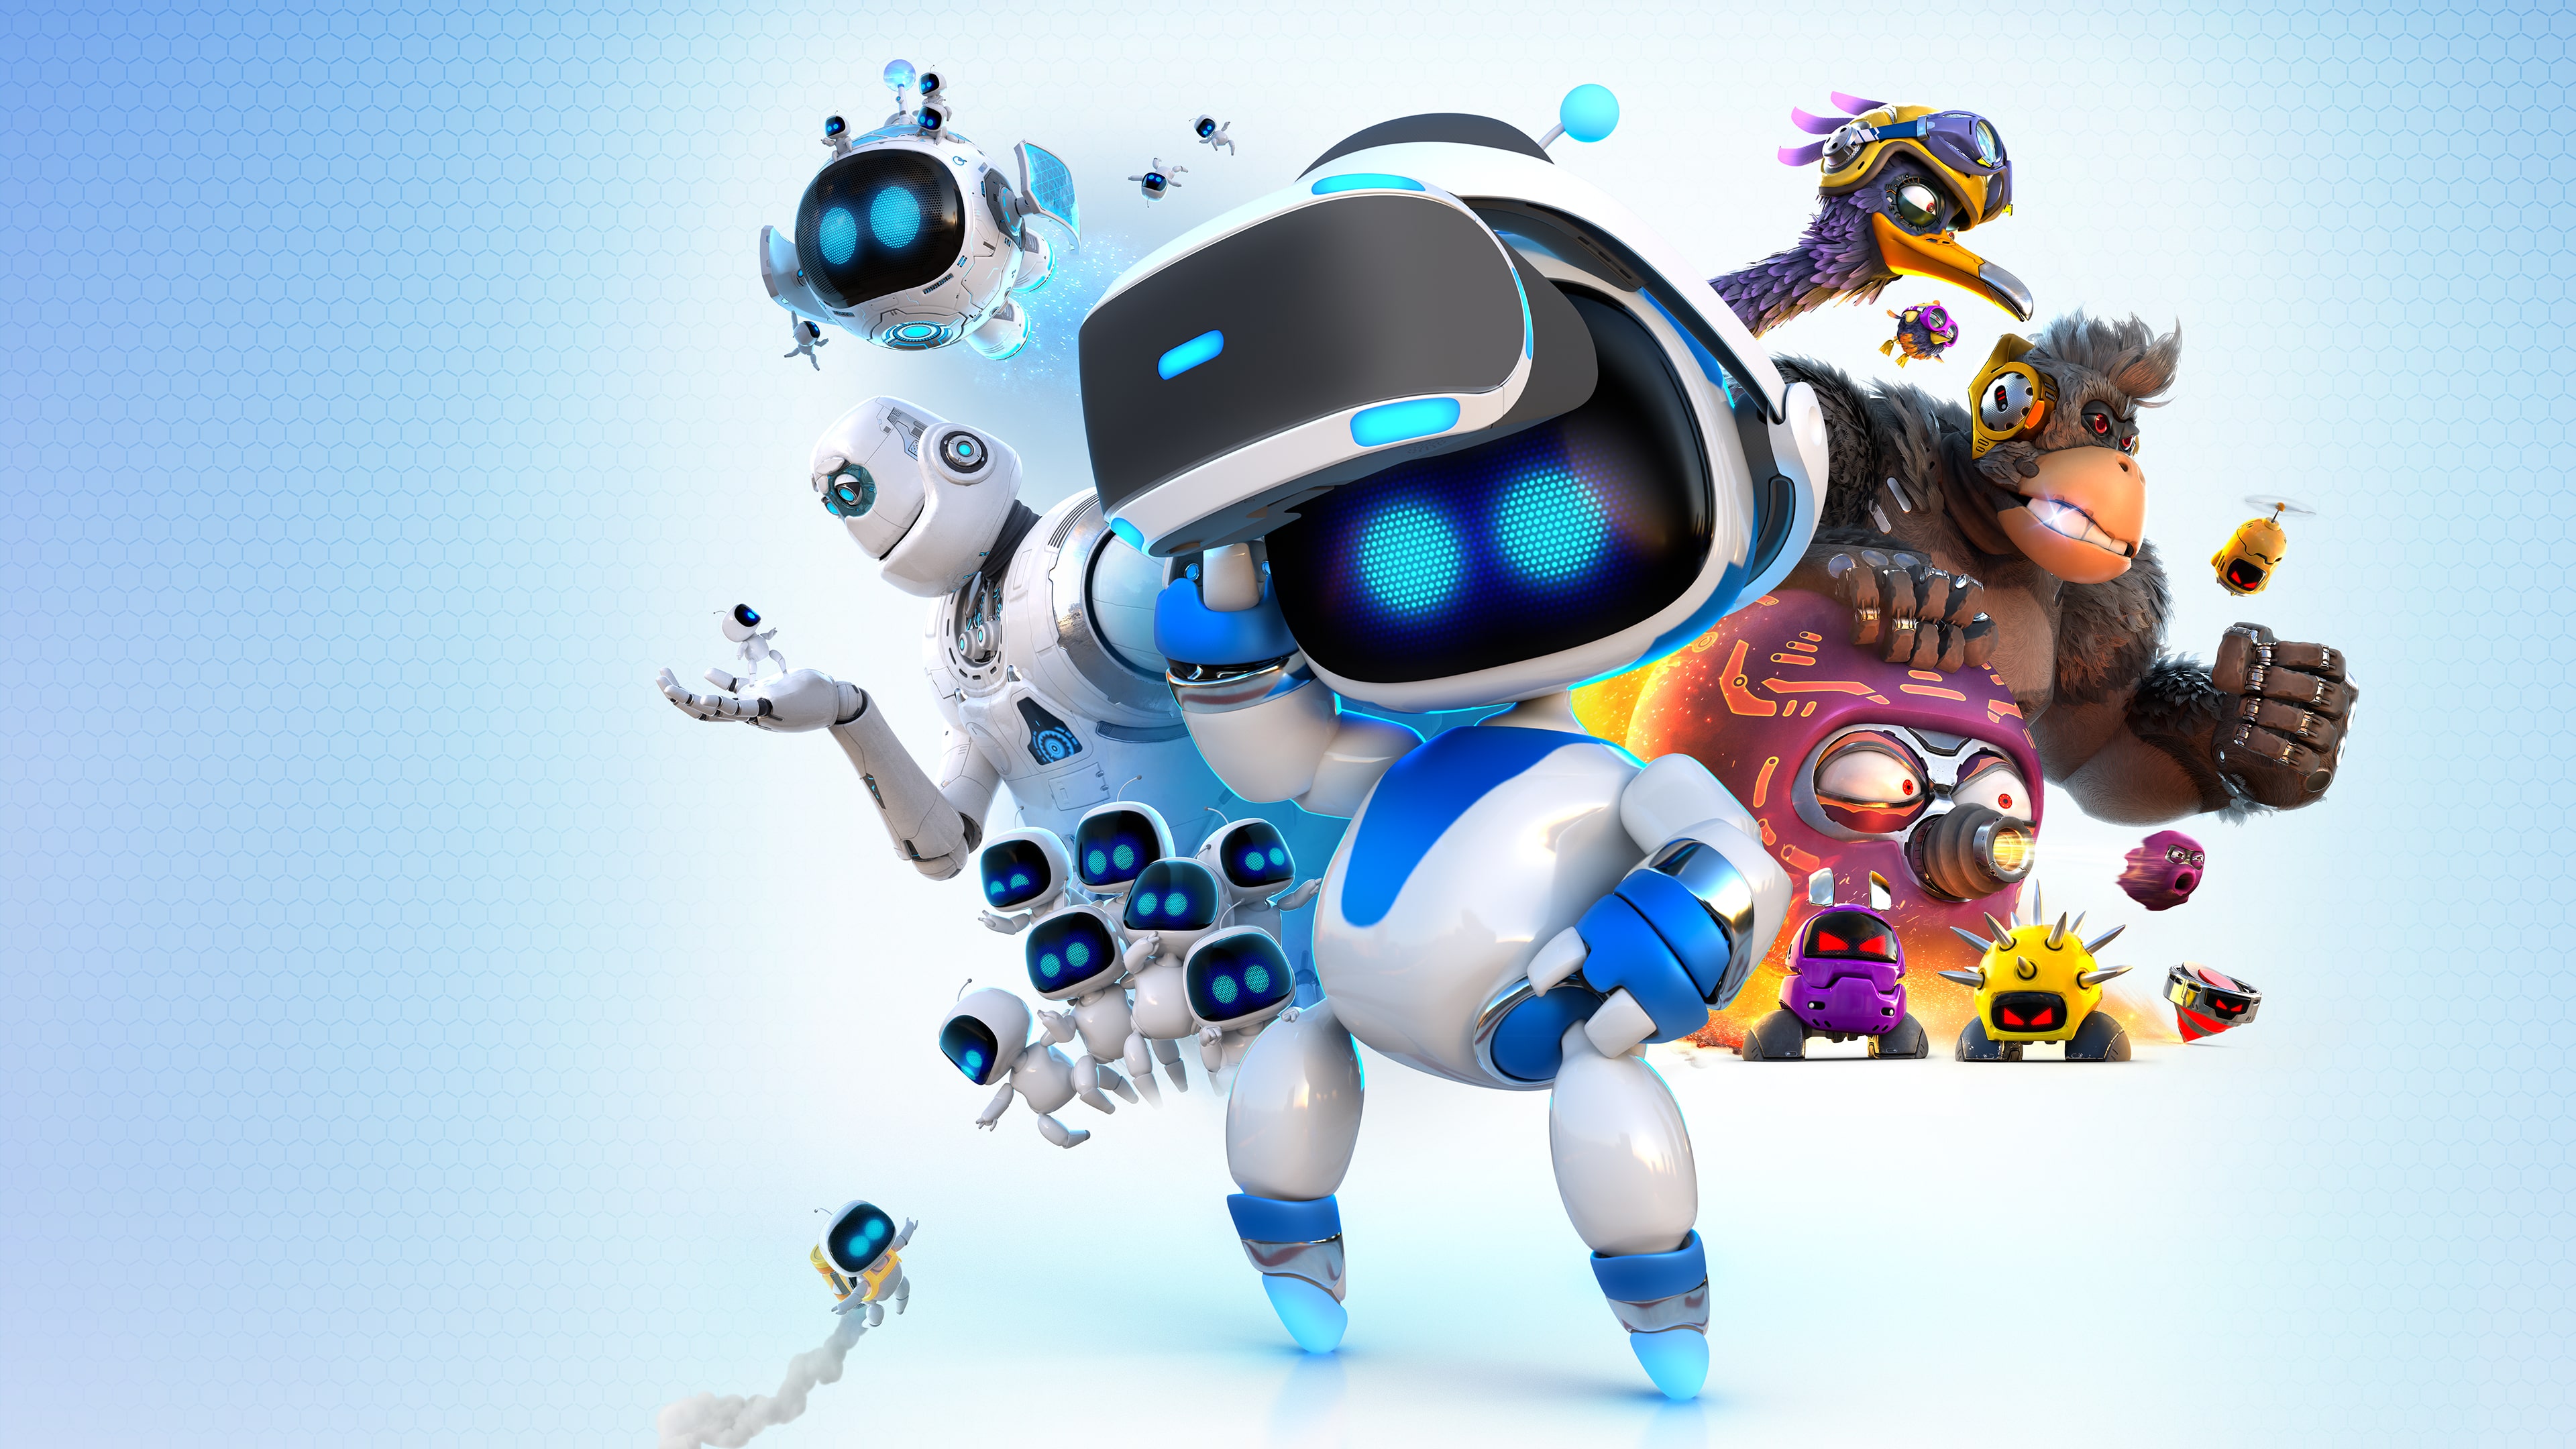 ASTRO BOT: RESCUE MISSION (Simplified Chinese, English, Korean, Thai, Japanese, Traditional Chinese)